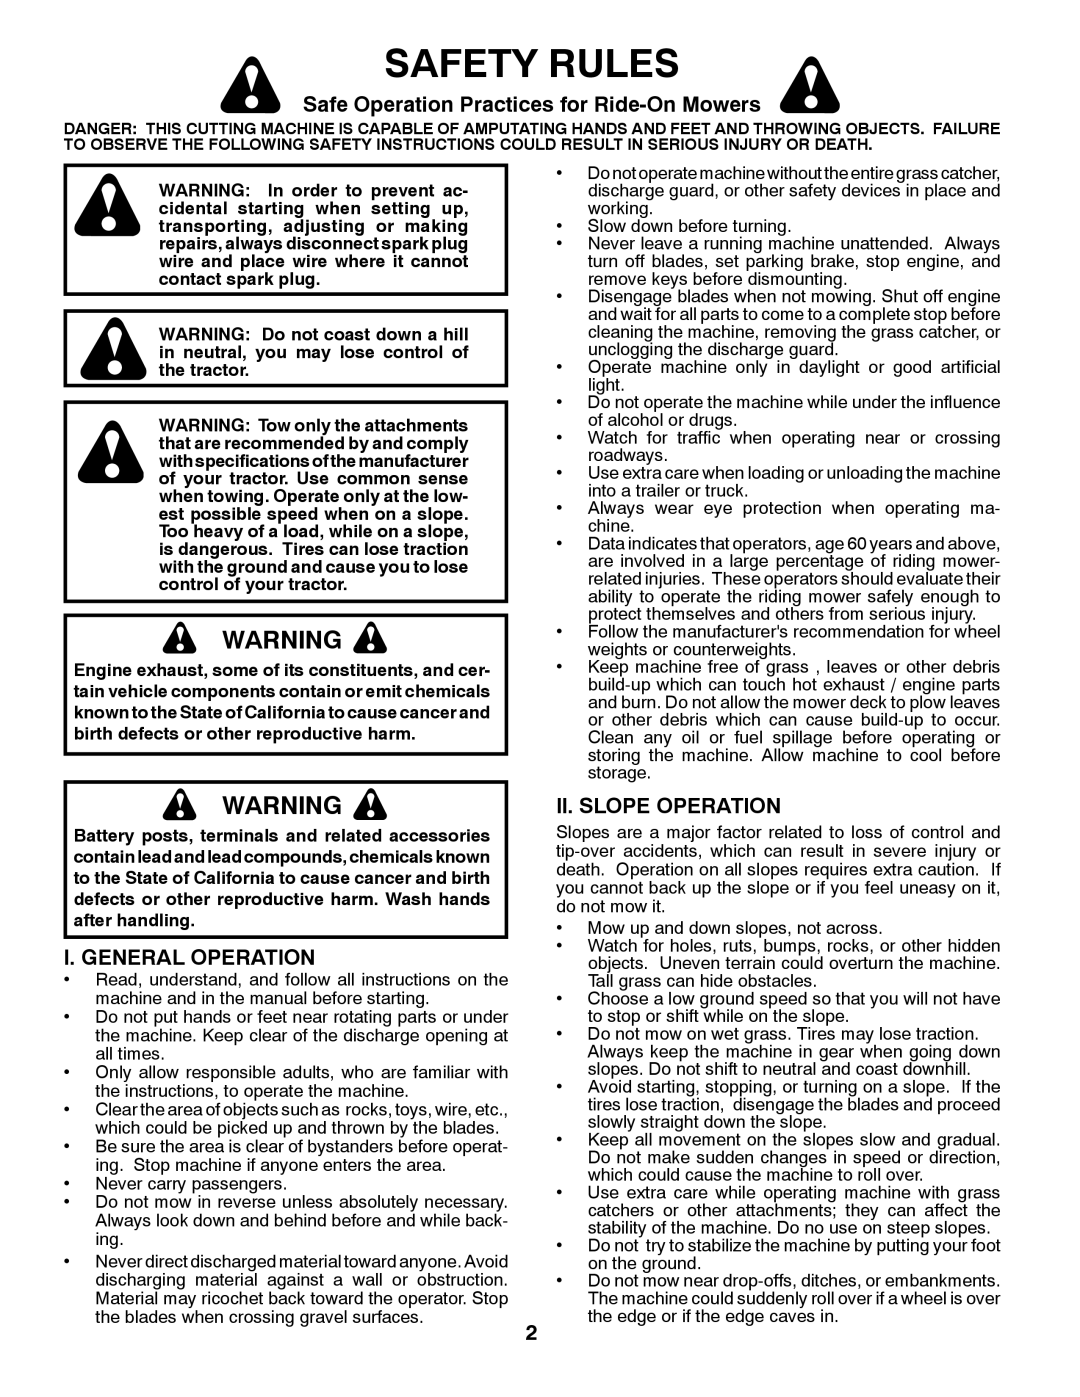 Husqvarna 03002 Safety Rules, Safe Operation Practices for Ride-On Mowers, I. General Operation, Ii. Slope Operation 